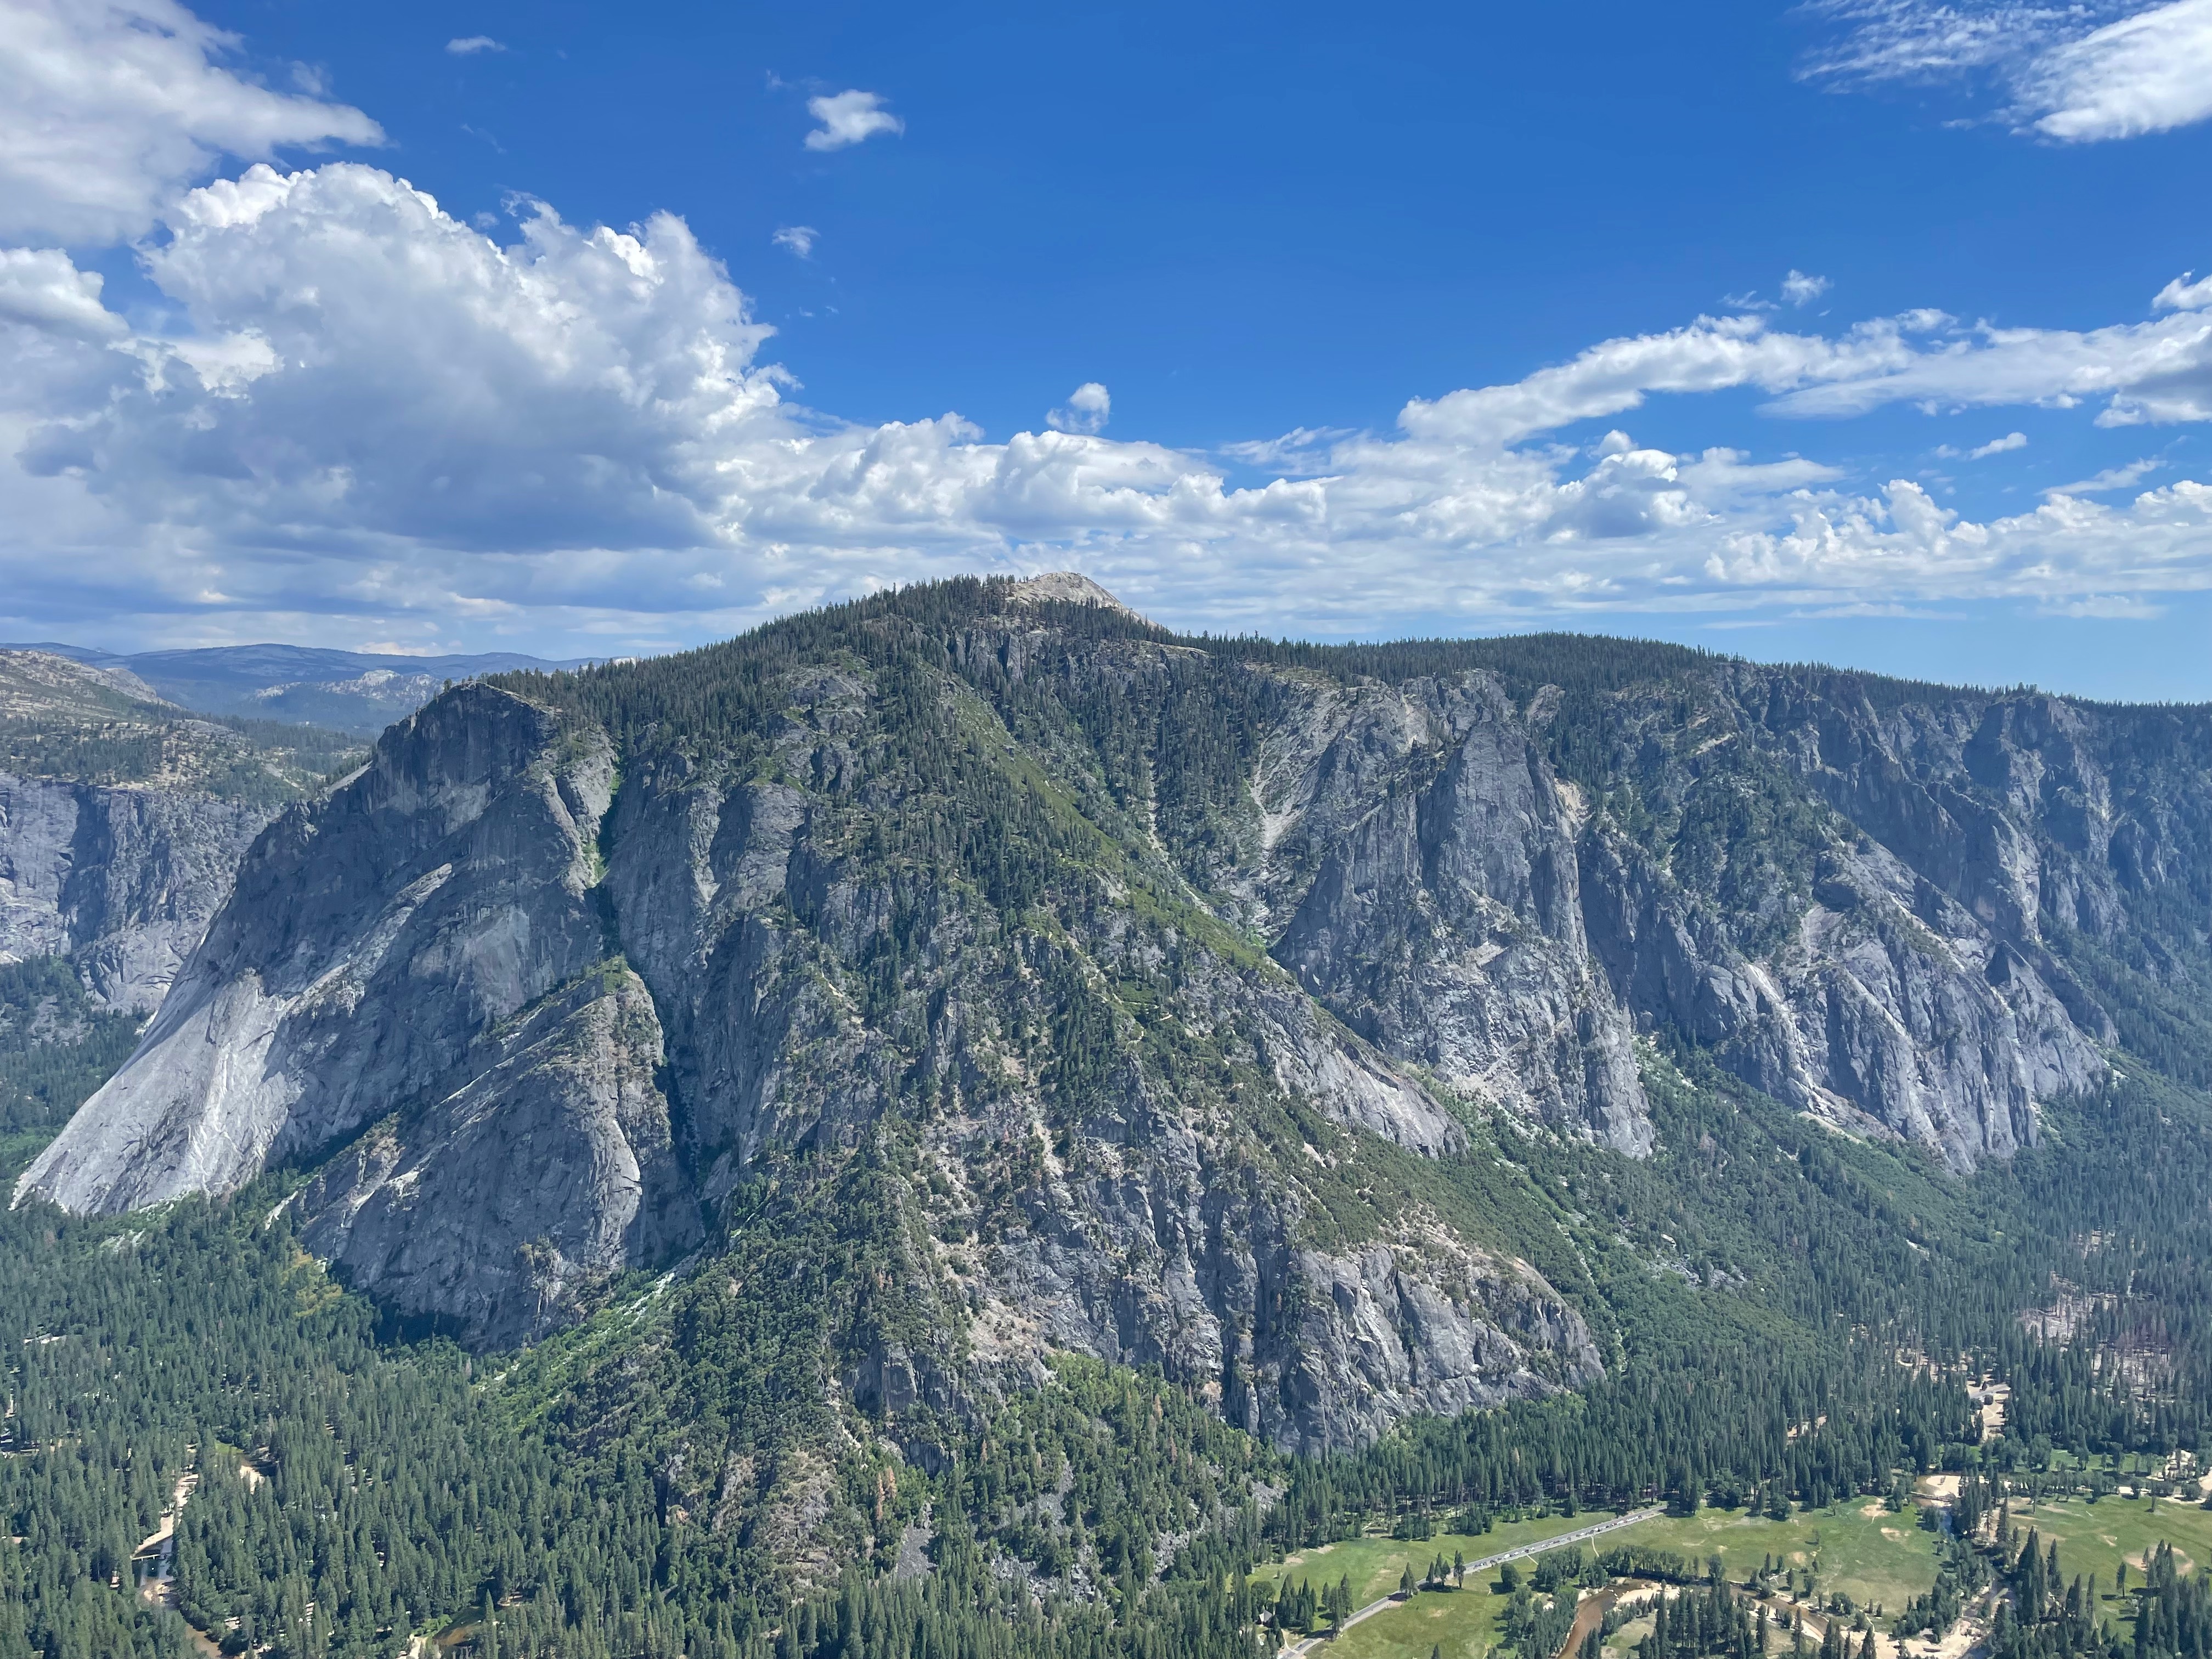 From Yosemite Point